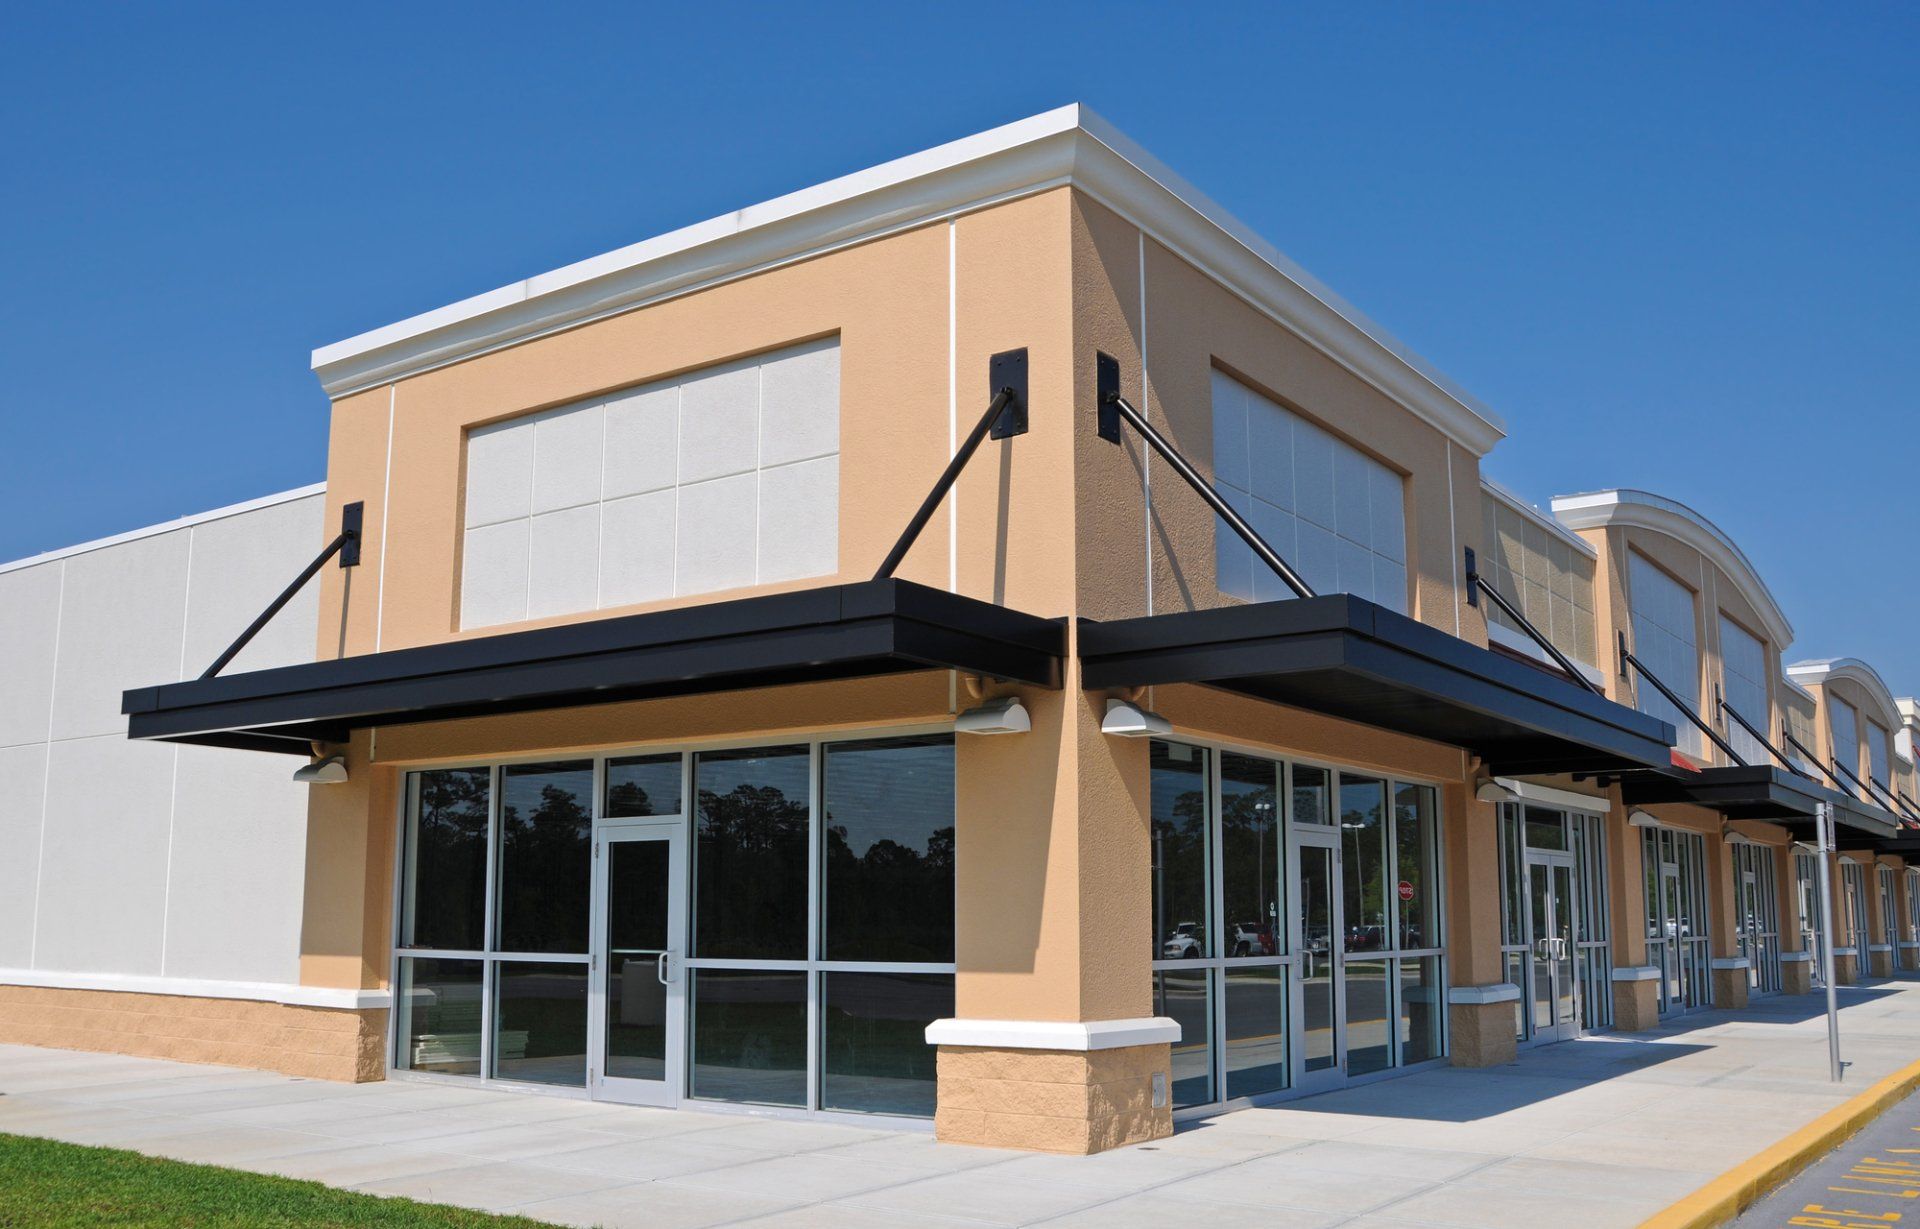 Commercial Construction in Ankeny, IA